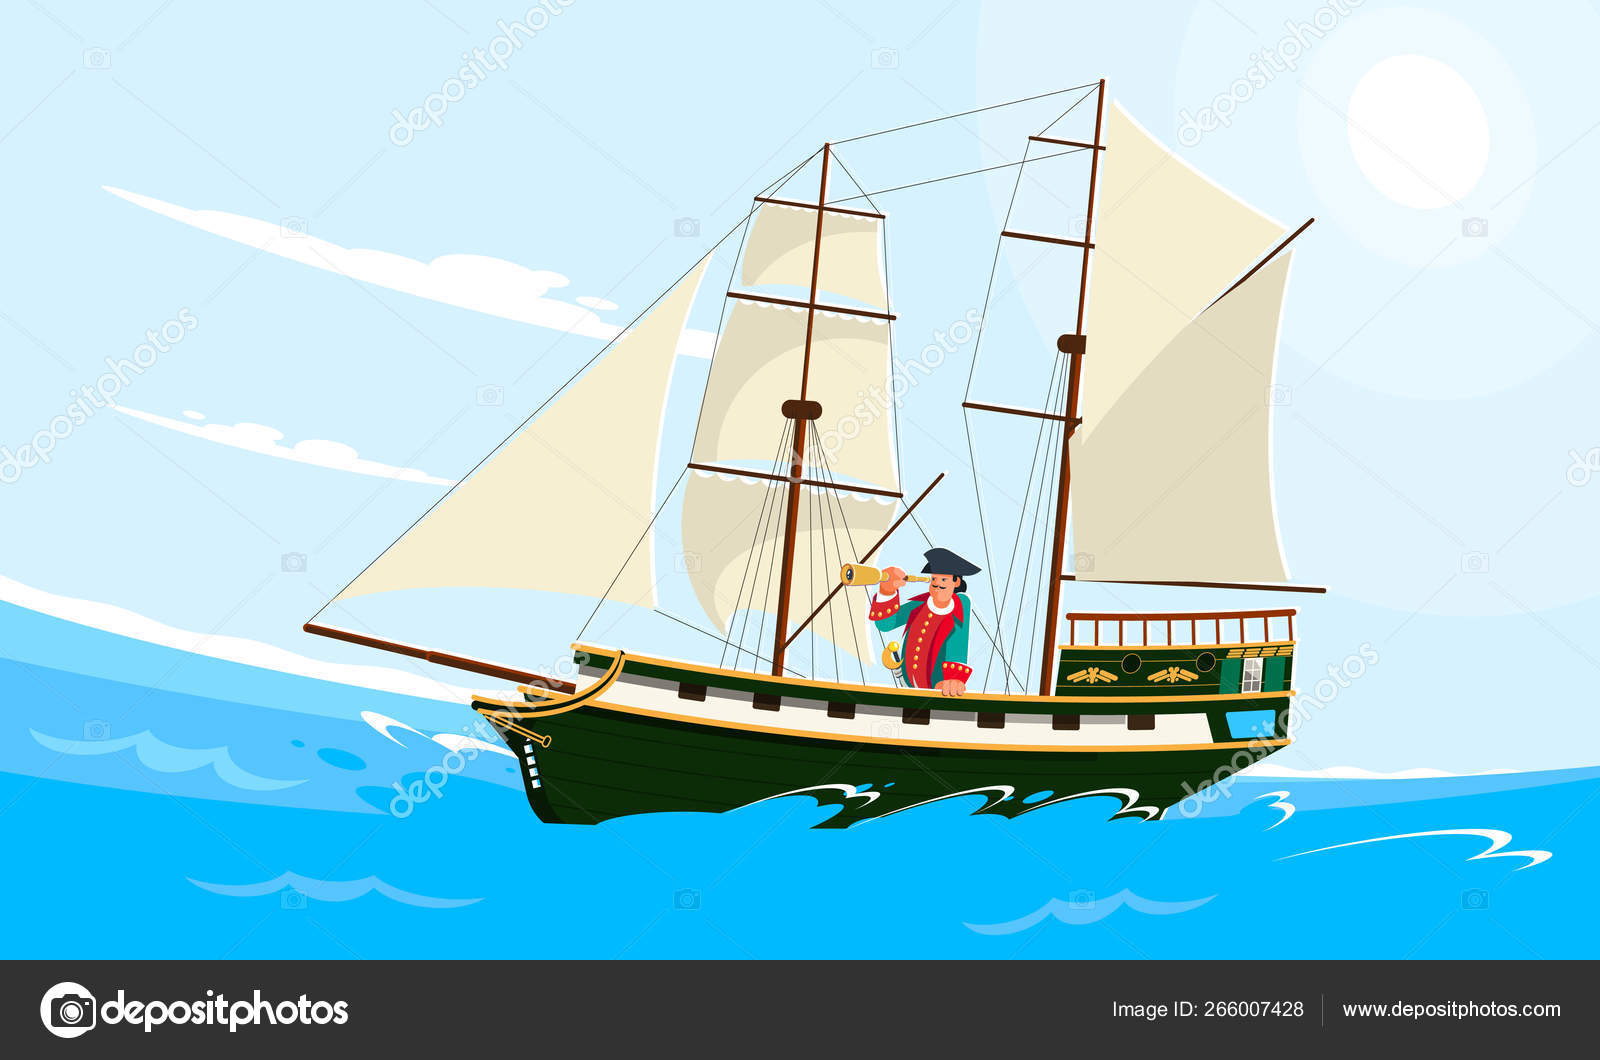 Realistic flat style illustration of an old wooden sailing ship on the  water and with the